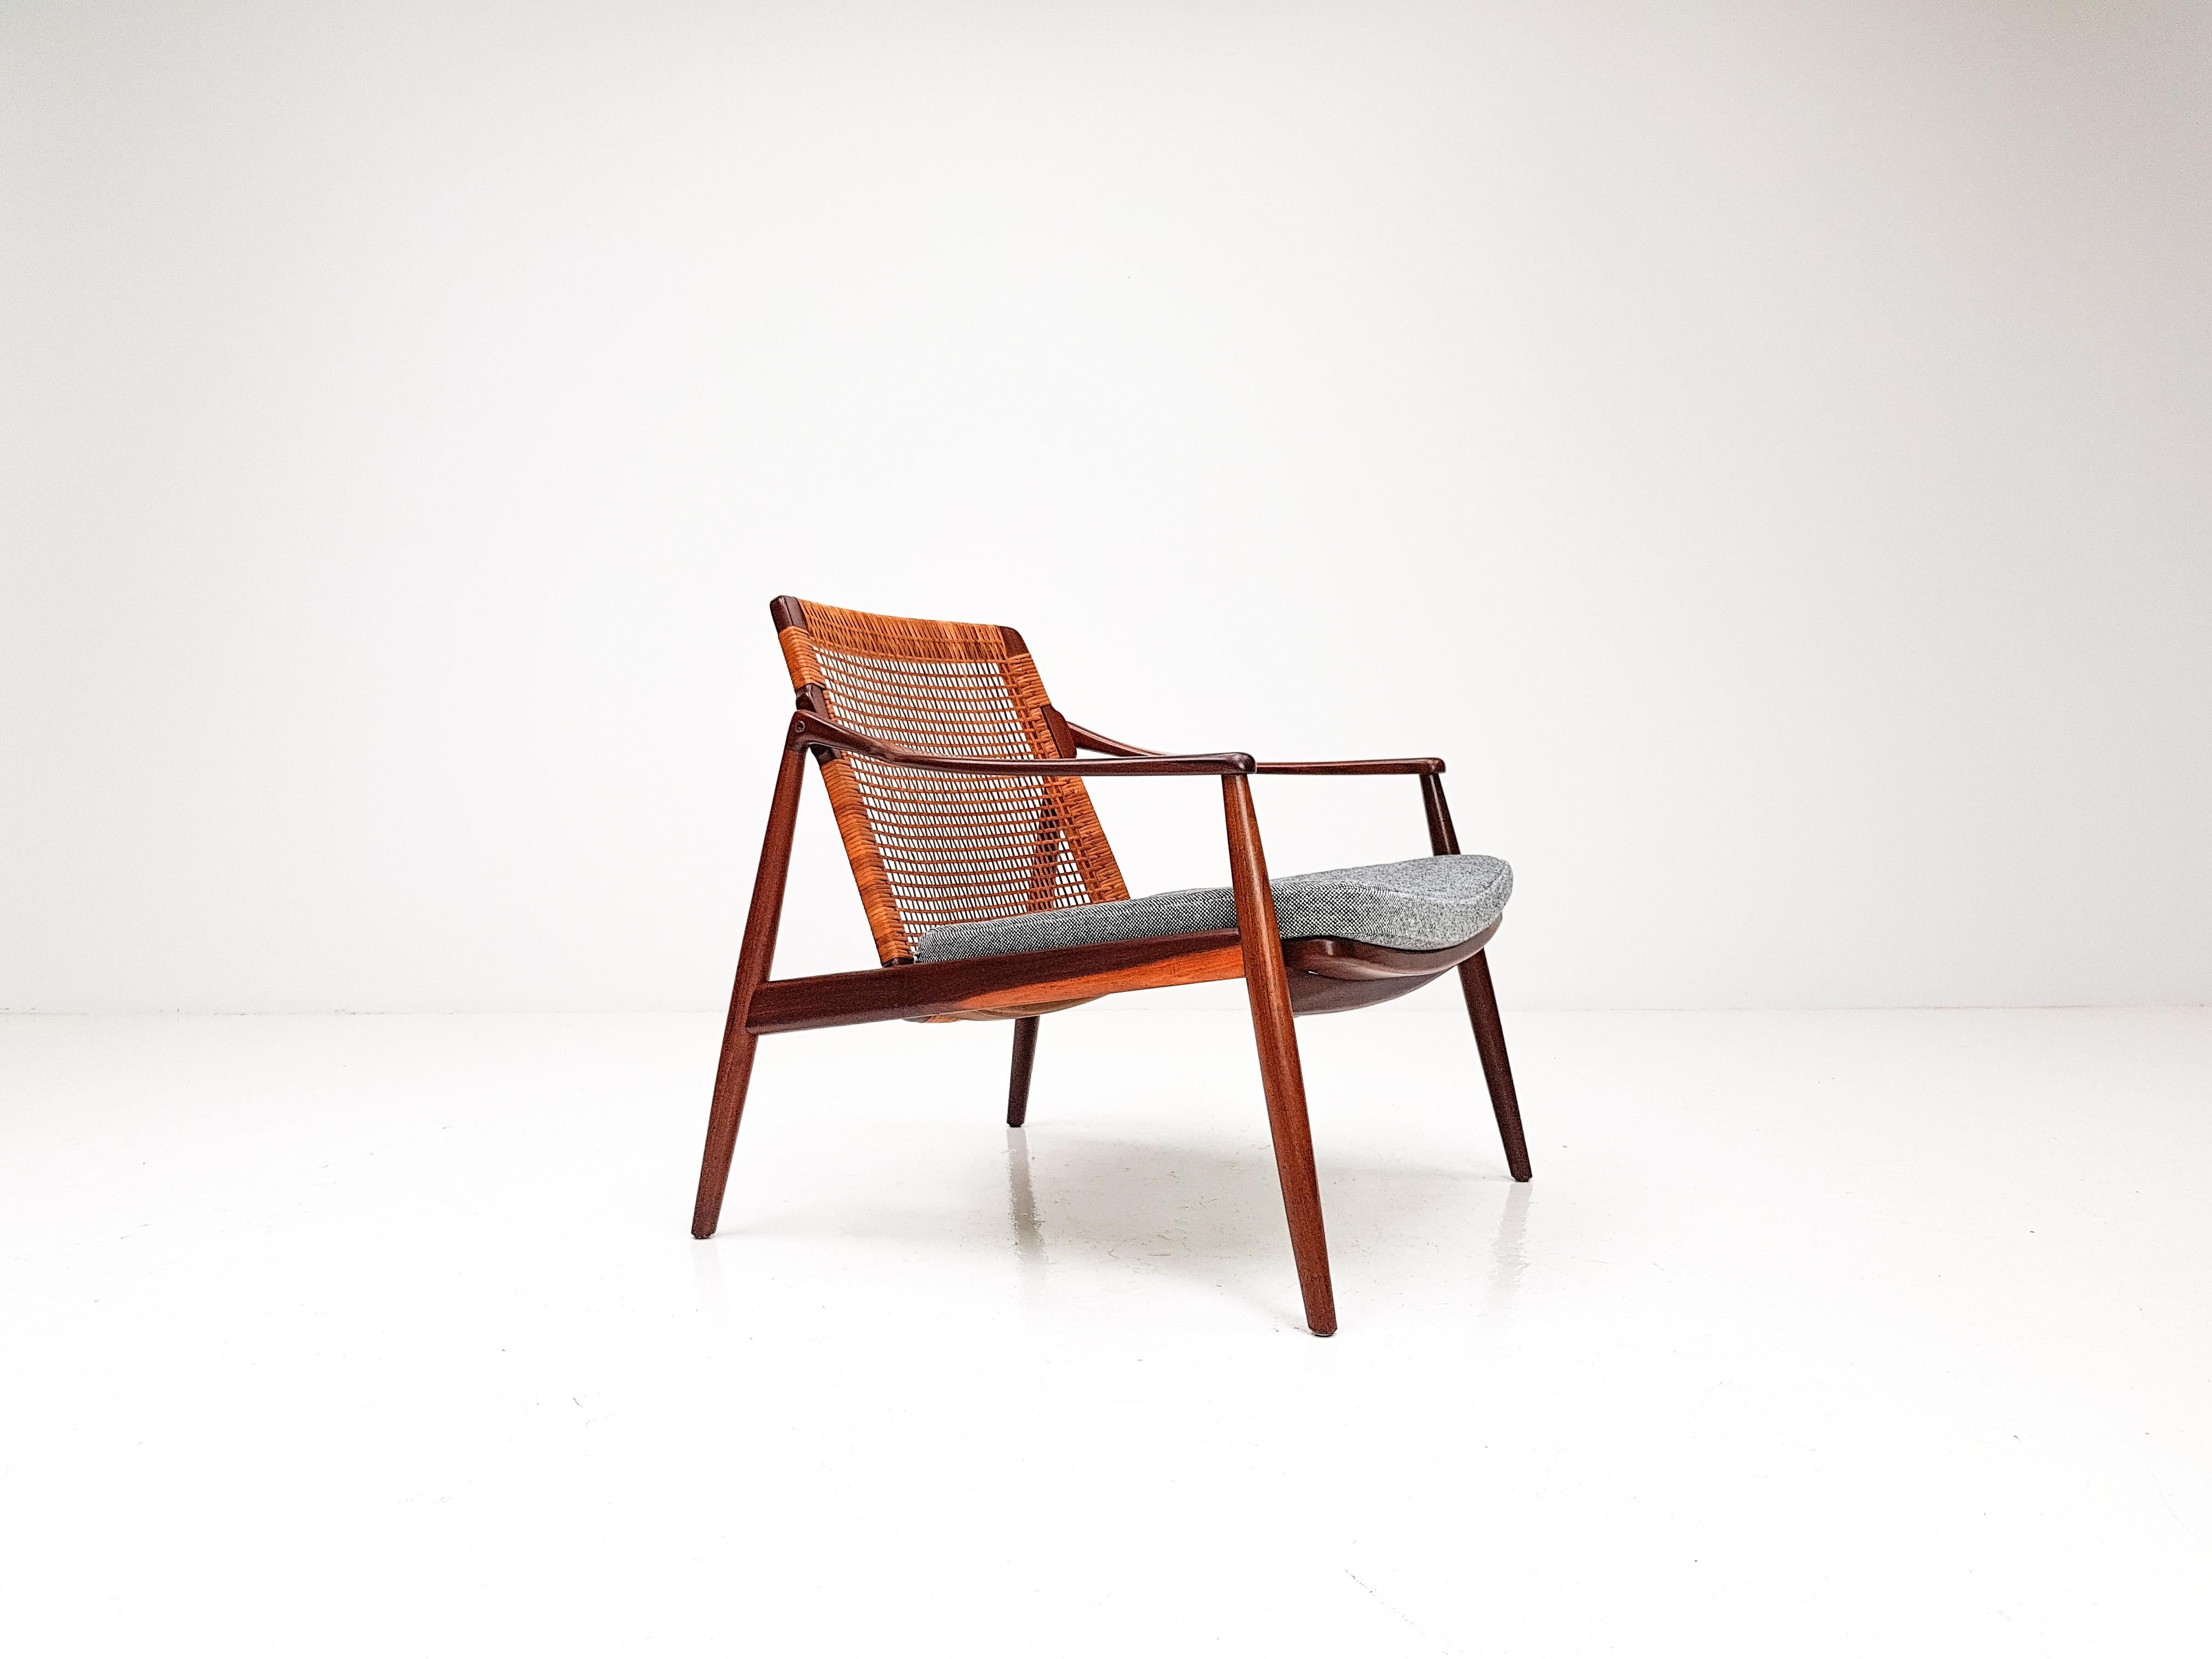 A 1960s Hartmut Lohmeyer easy chair in cane for Wilkhahn, Germany.

A beautifully shaped teak piece featuring a cane backrest. Seat pad reupholstered in Kvadrat Hallingdal 65 fabric.

Hartmut Lohmeyer was trained as an architect under Egon